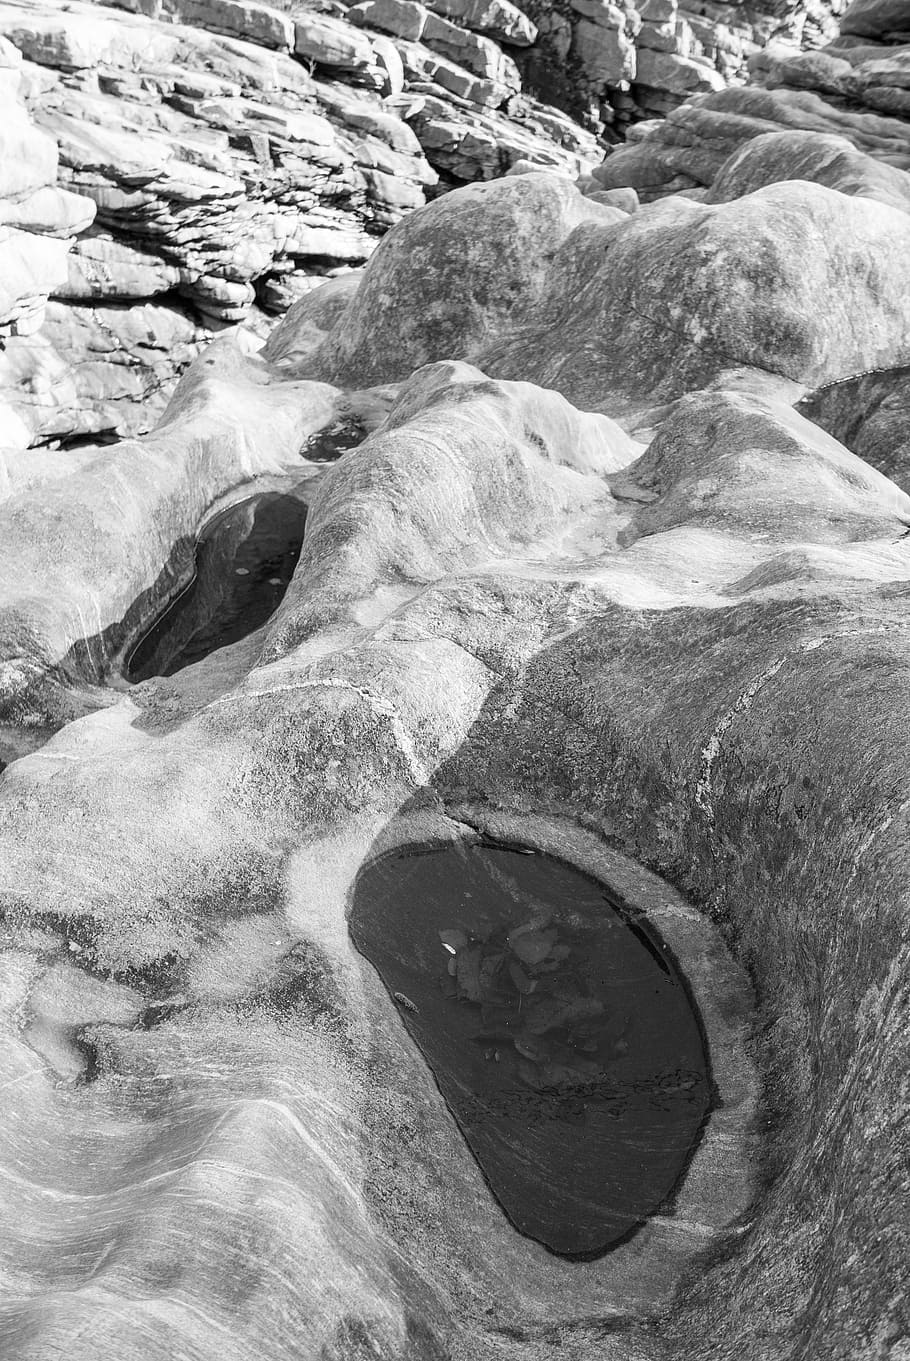 maggia, maggia valley, ticino, switzerland, landscape, nature black-and-white, rock, pool, water, puddle